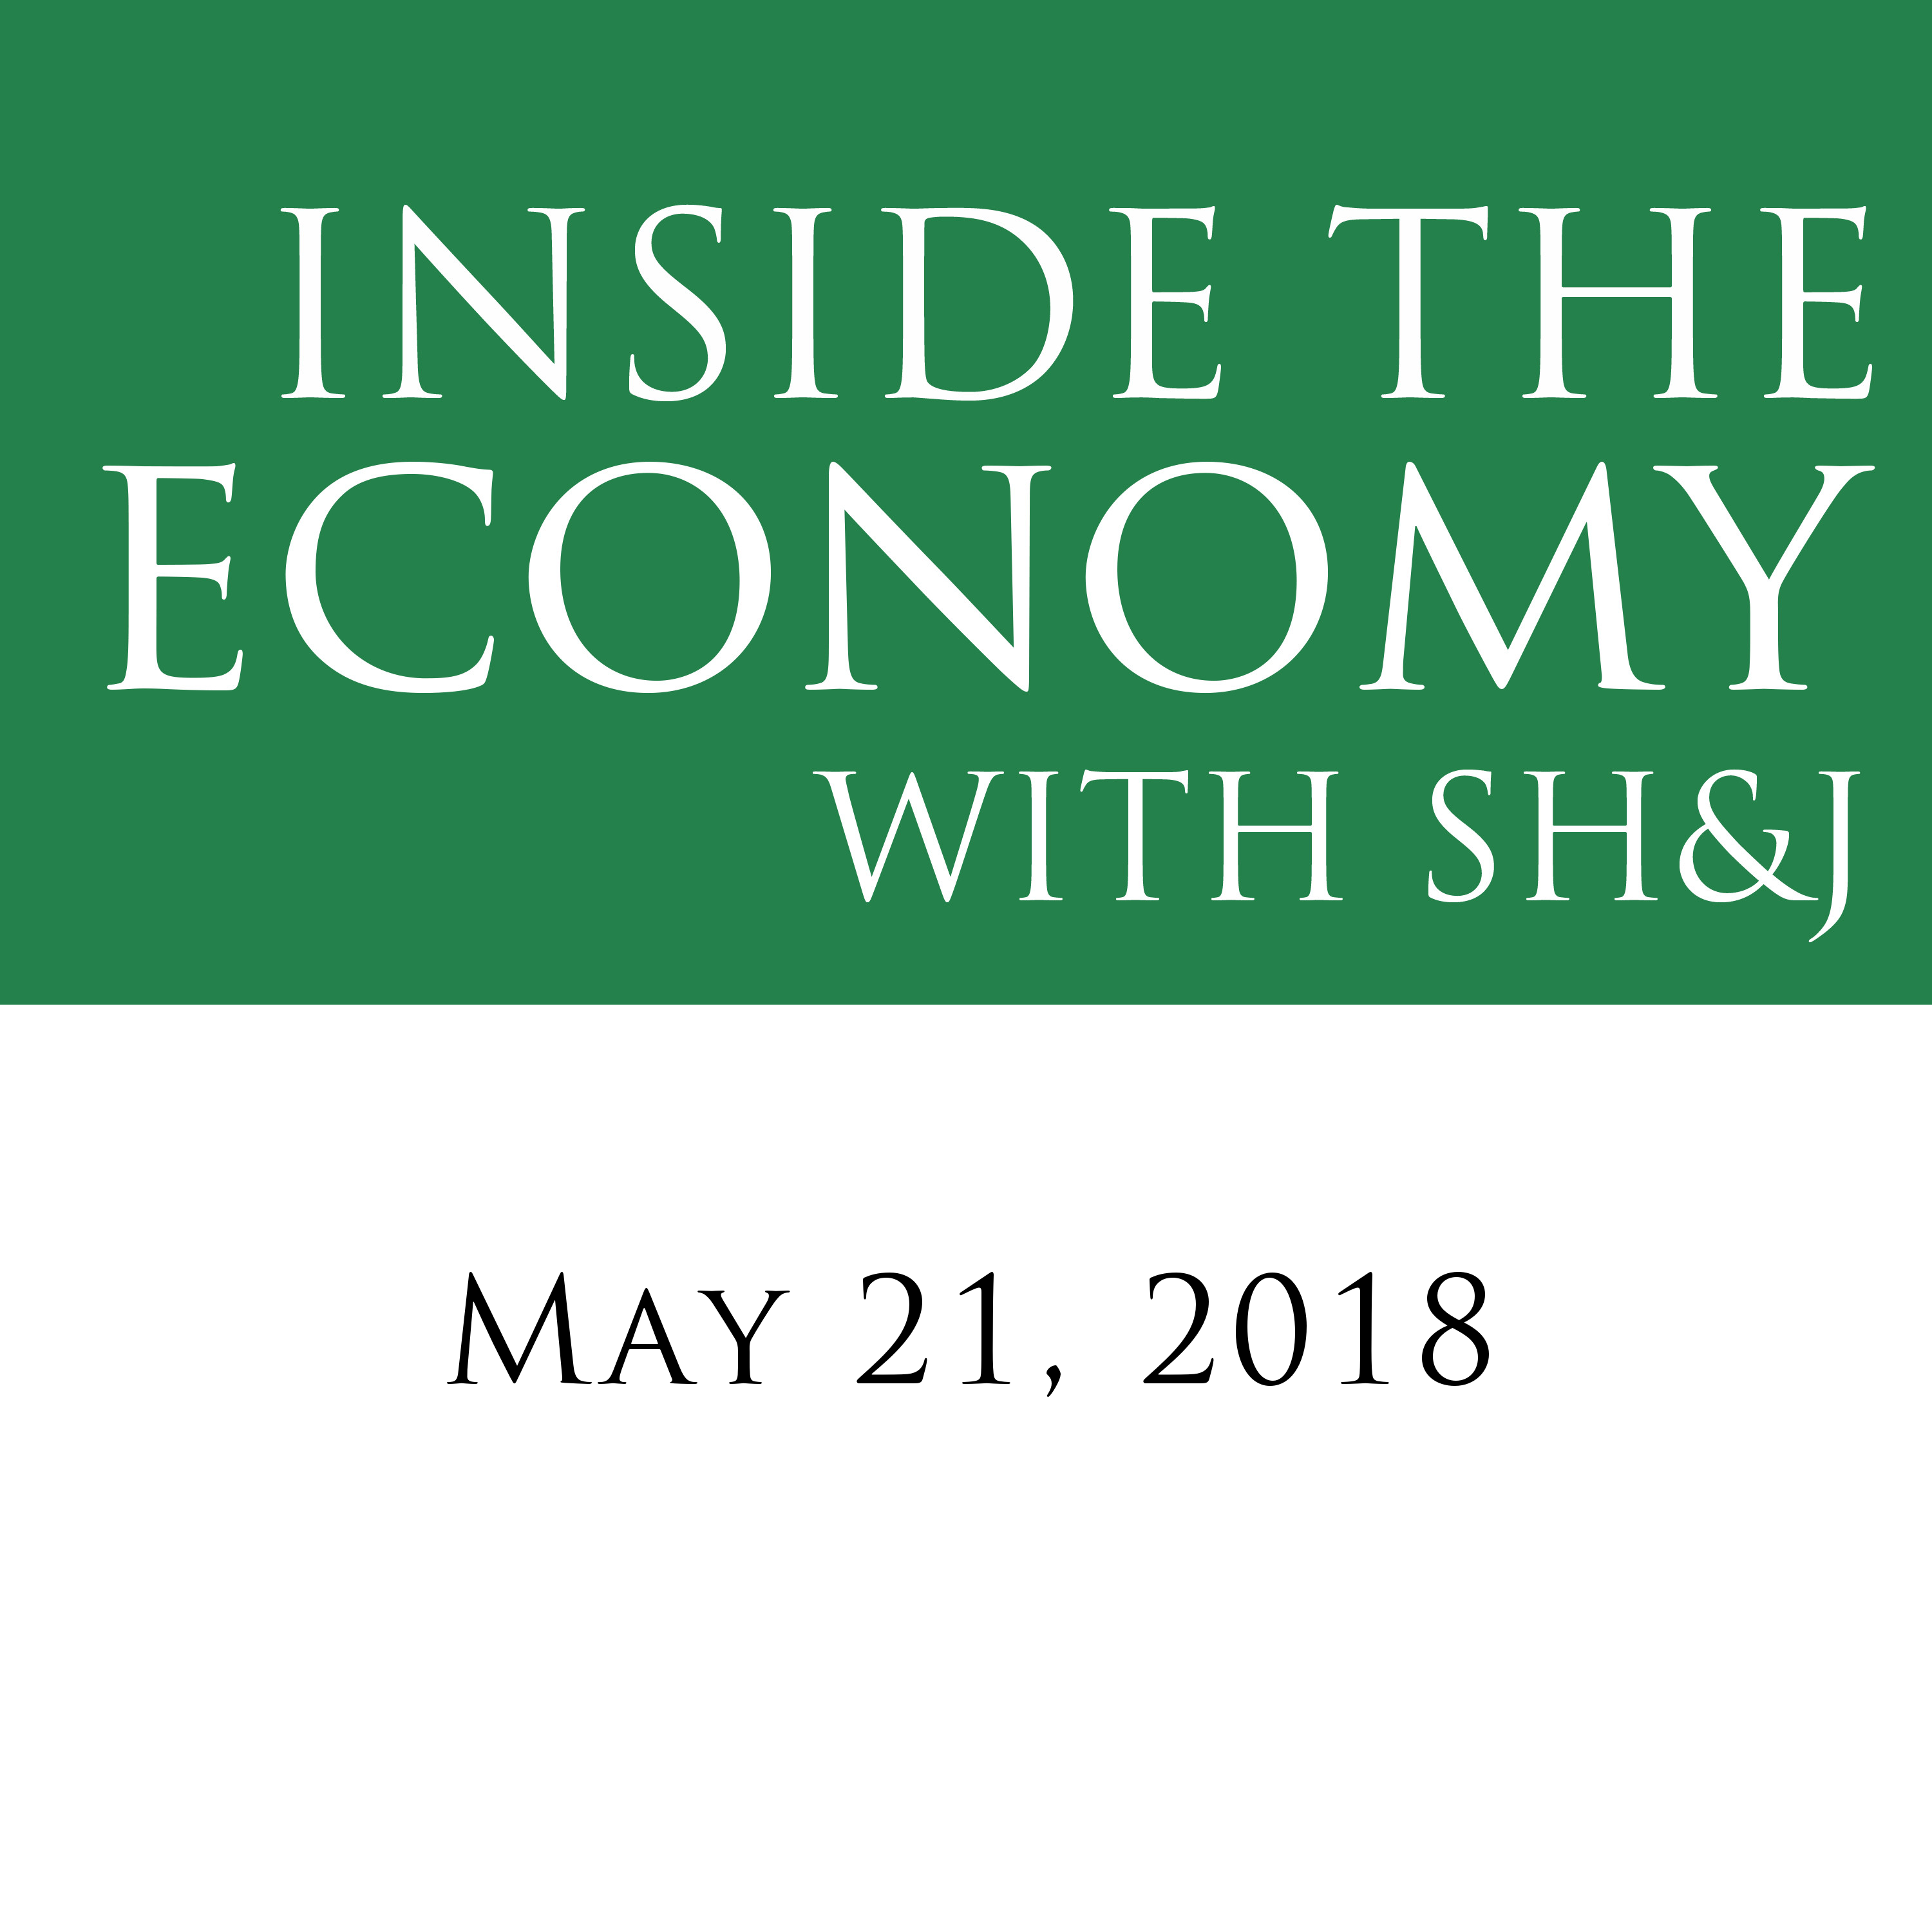 Inside the Economy w/ SH&J: Interest Rates and the Yield Curve